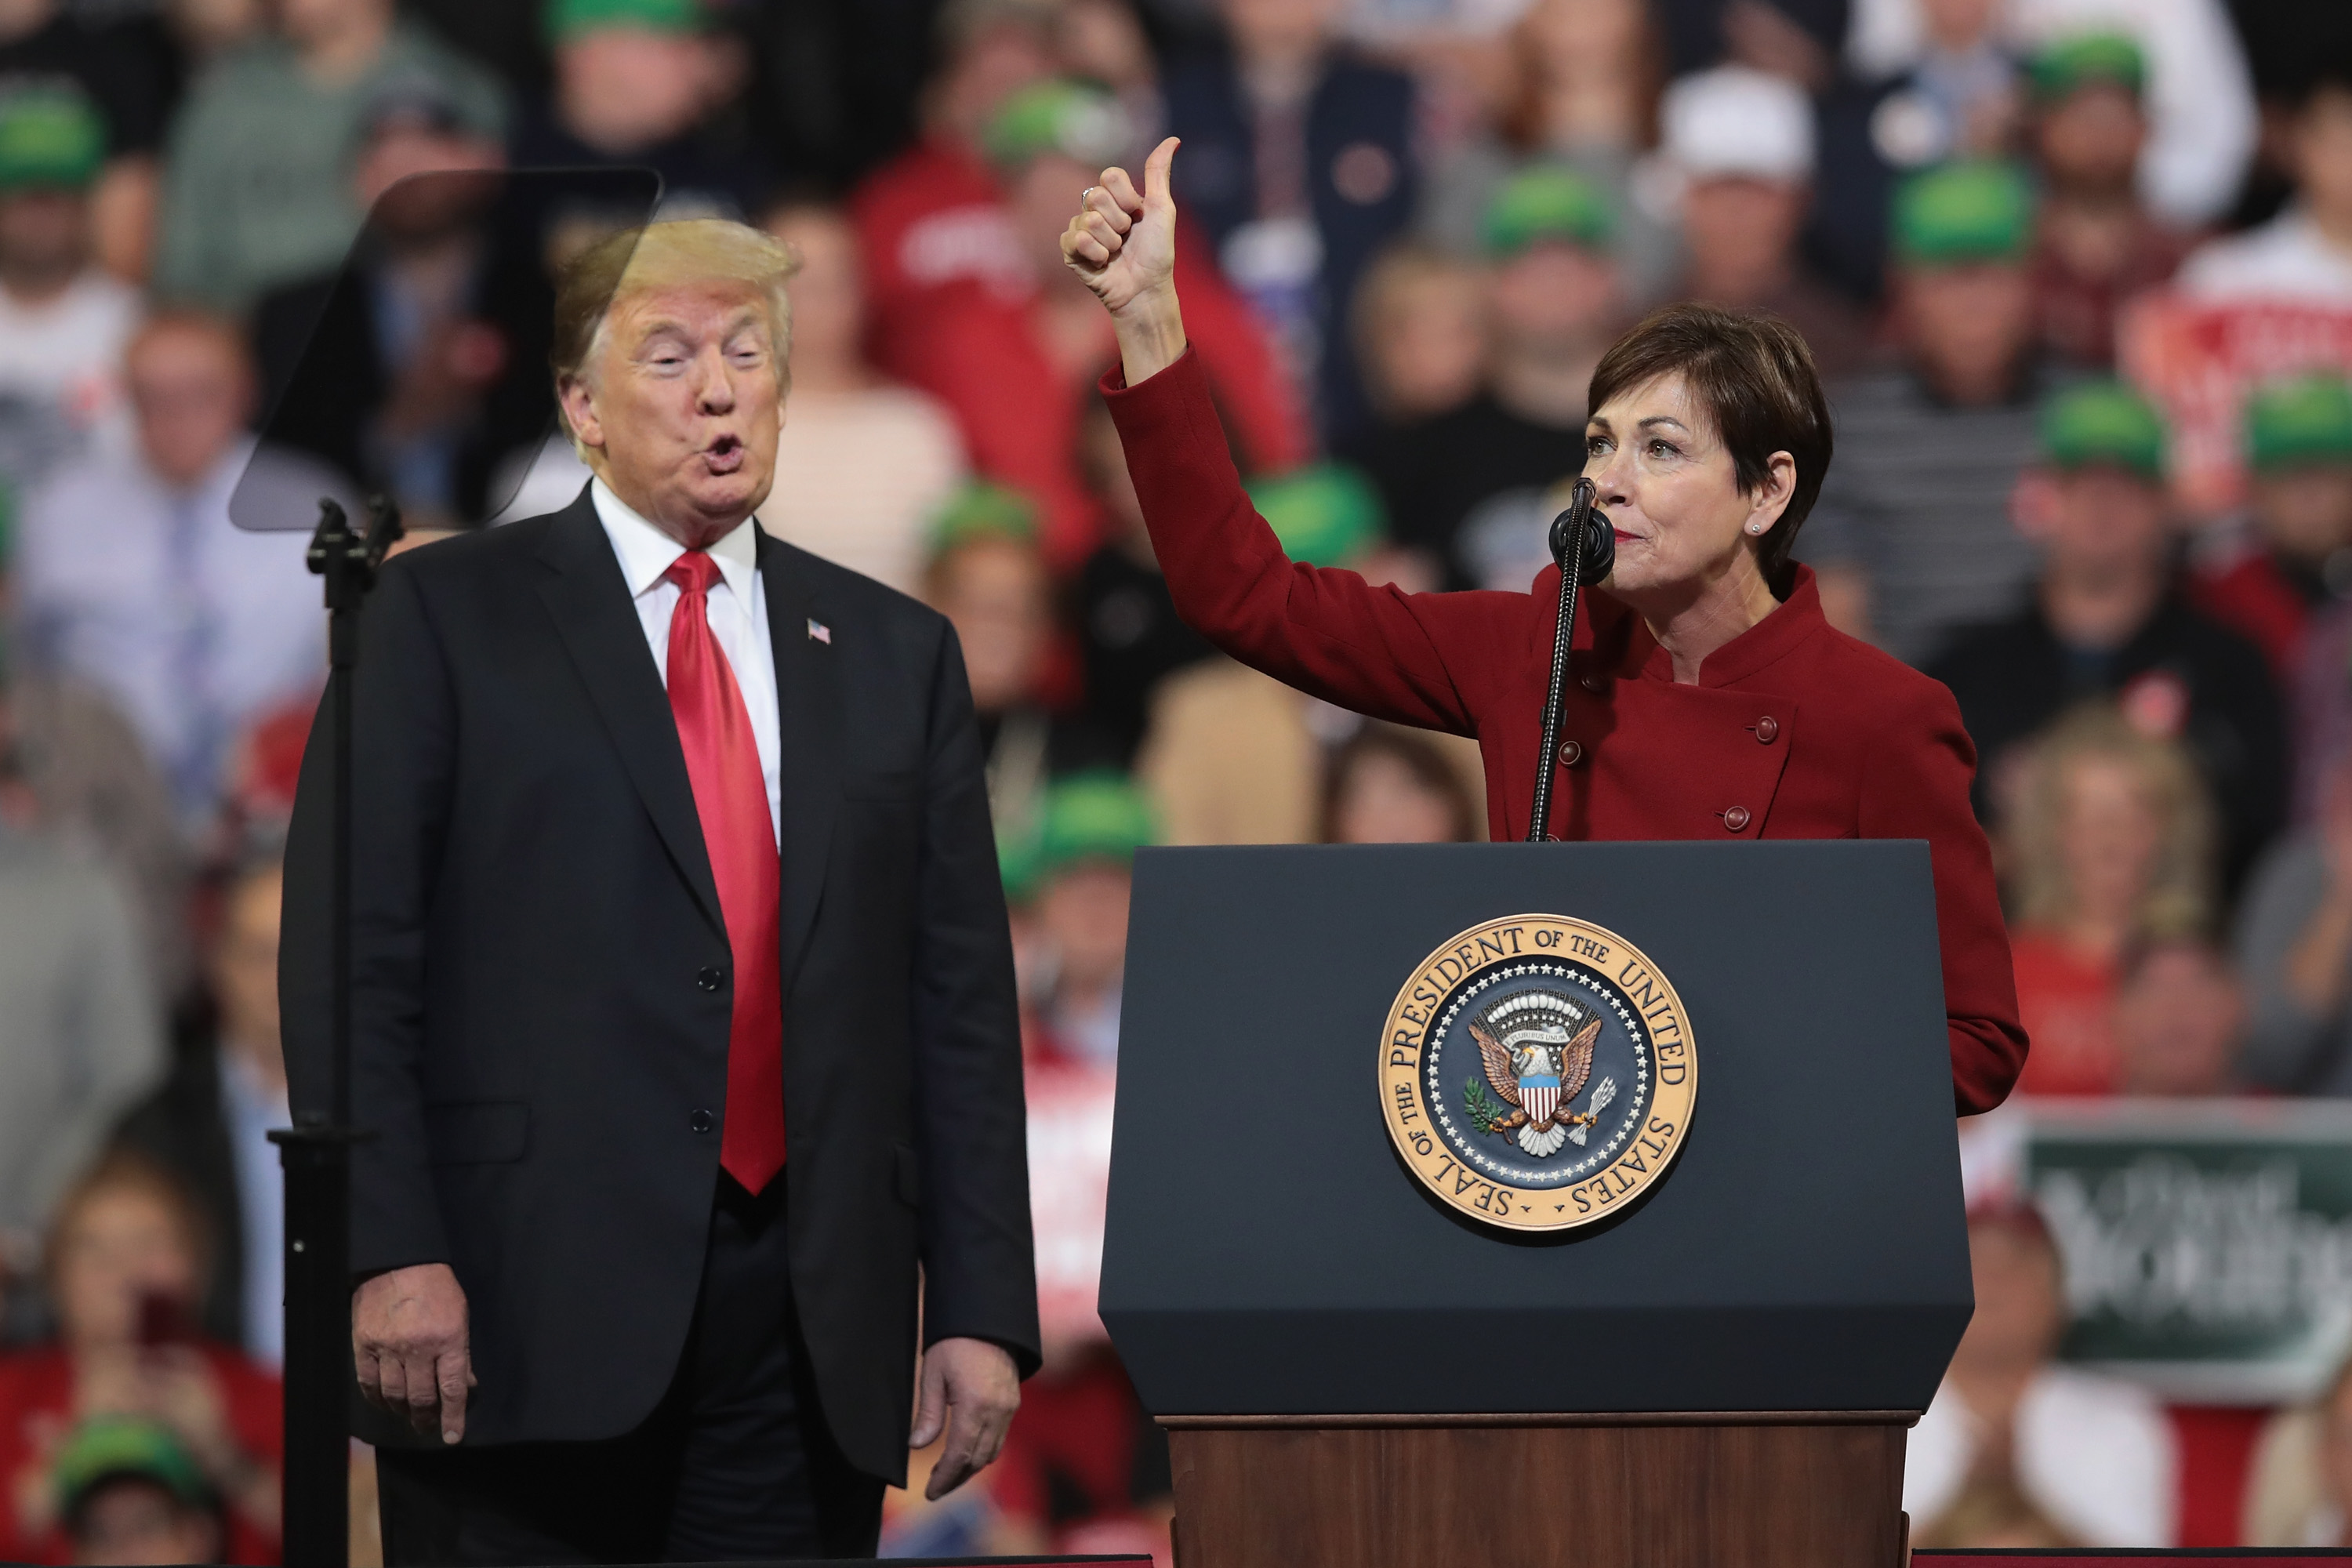 U.S. President Donald Trump listens as Iowa Gov. Kim Reynolds speaks during a campaign rally at the Mid-America Center on October 9, 2018 in Council Bluffs. (Photo by Scott Olson/Getty Images)